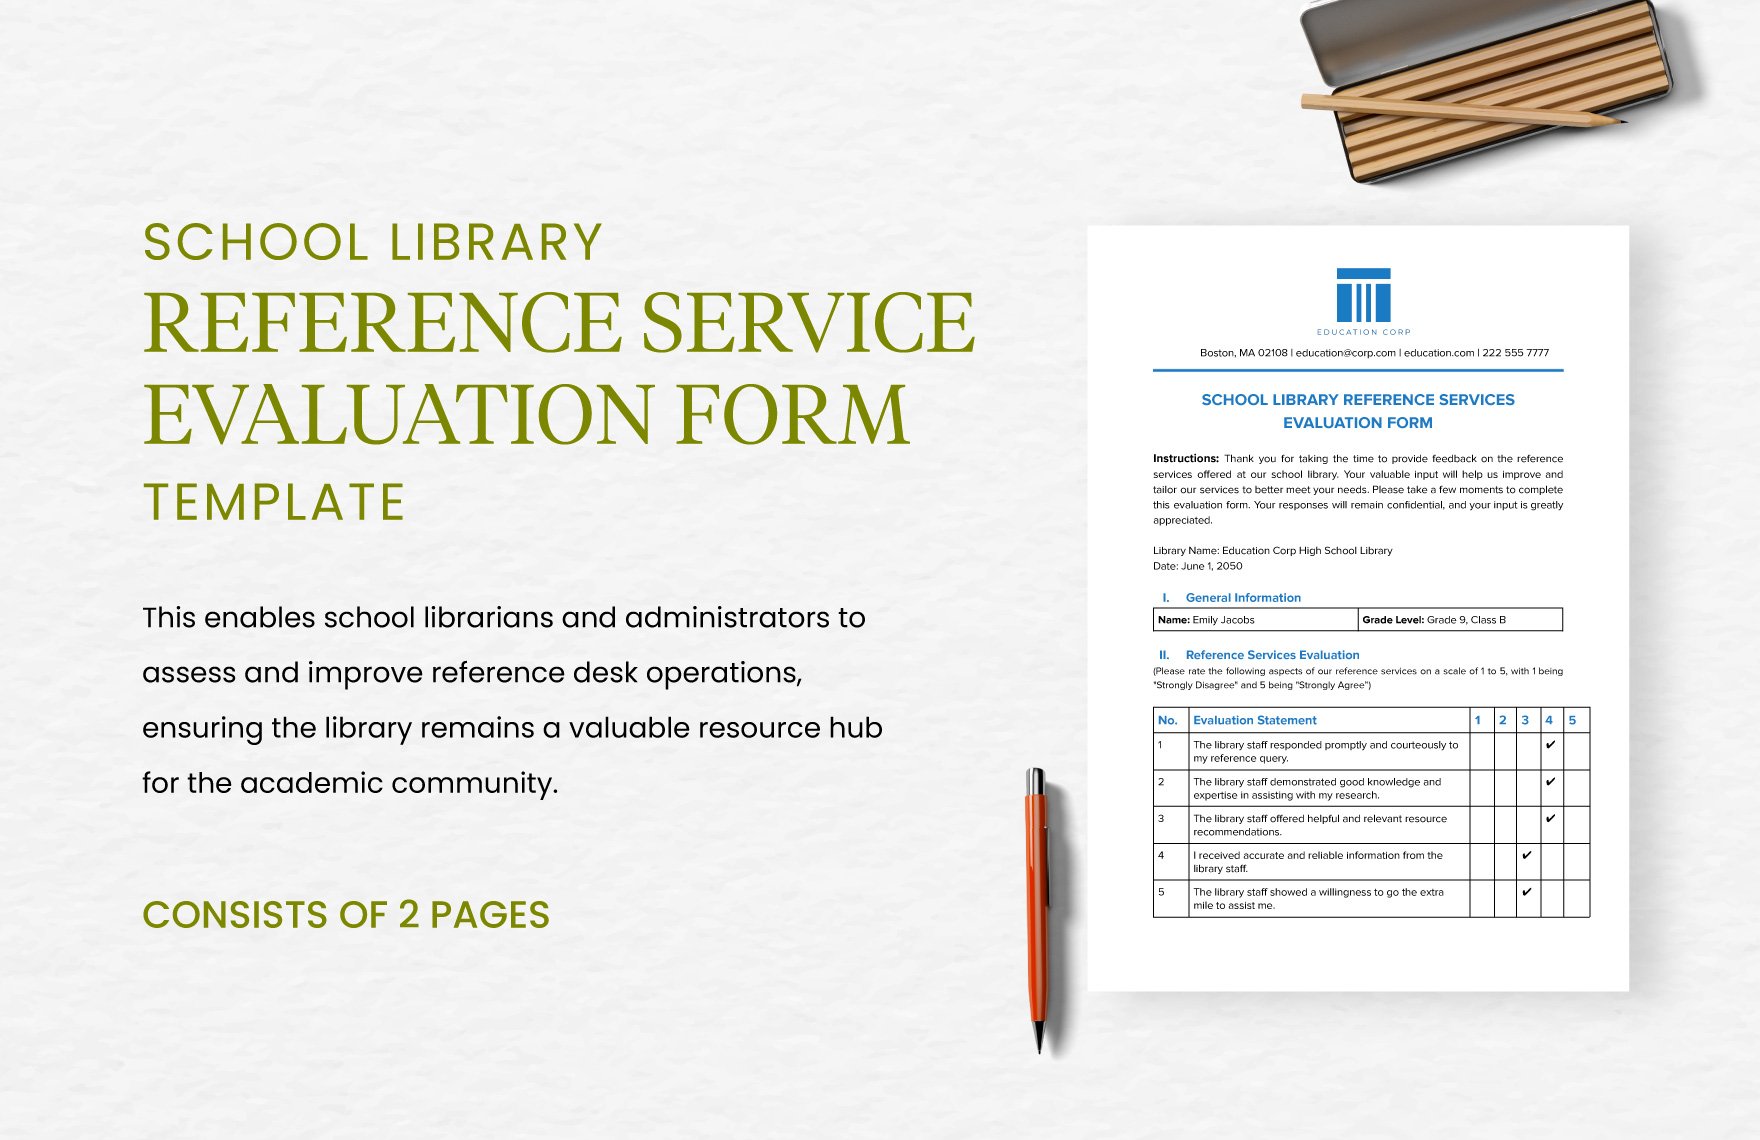 School Library Reference Services Evaluation Form Template in Word, Google Docs, PDF